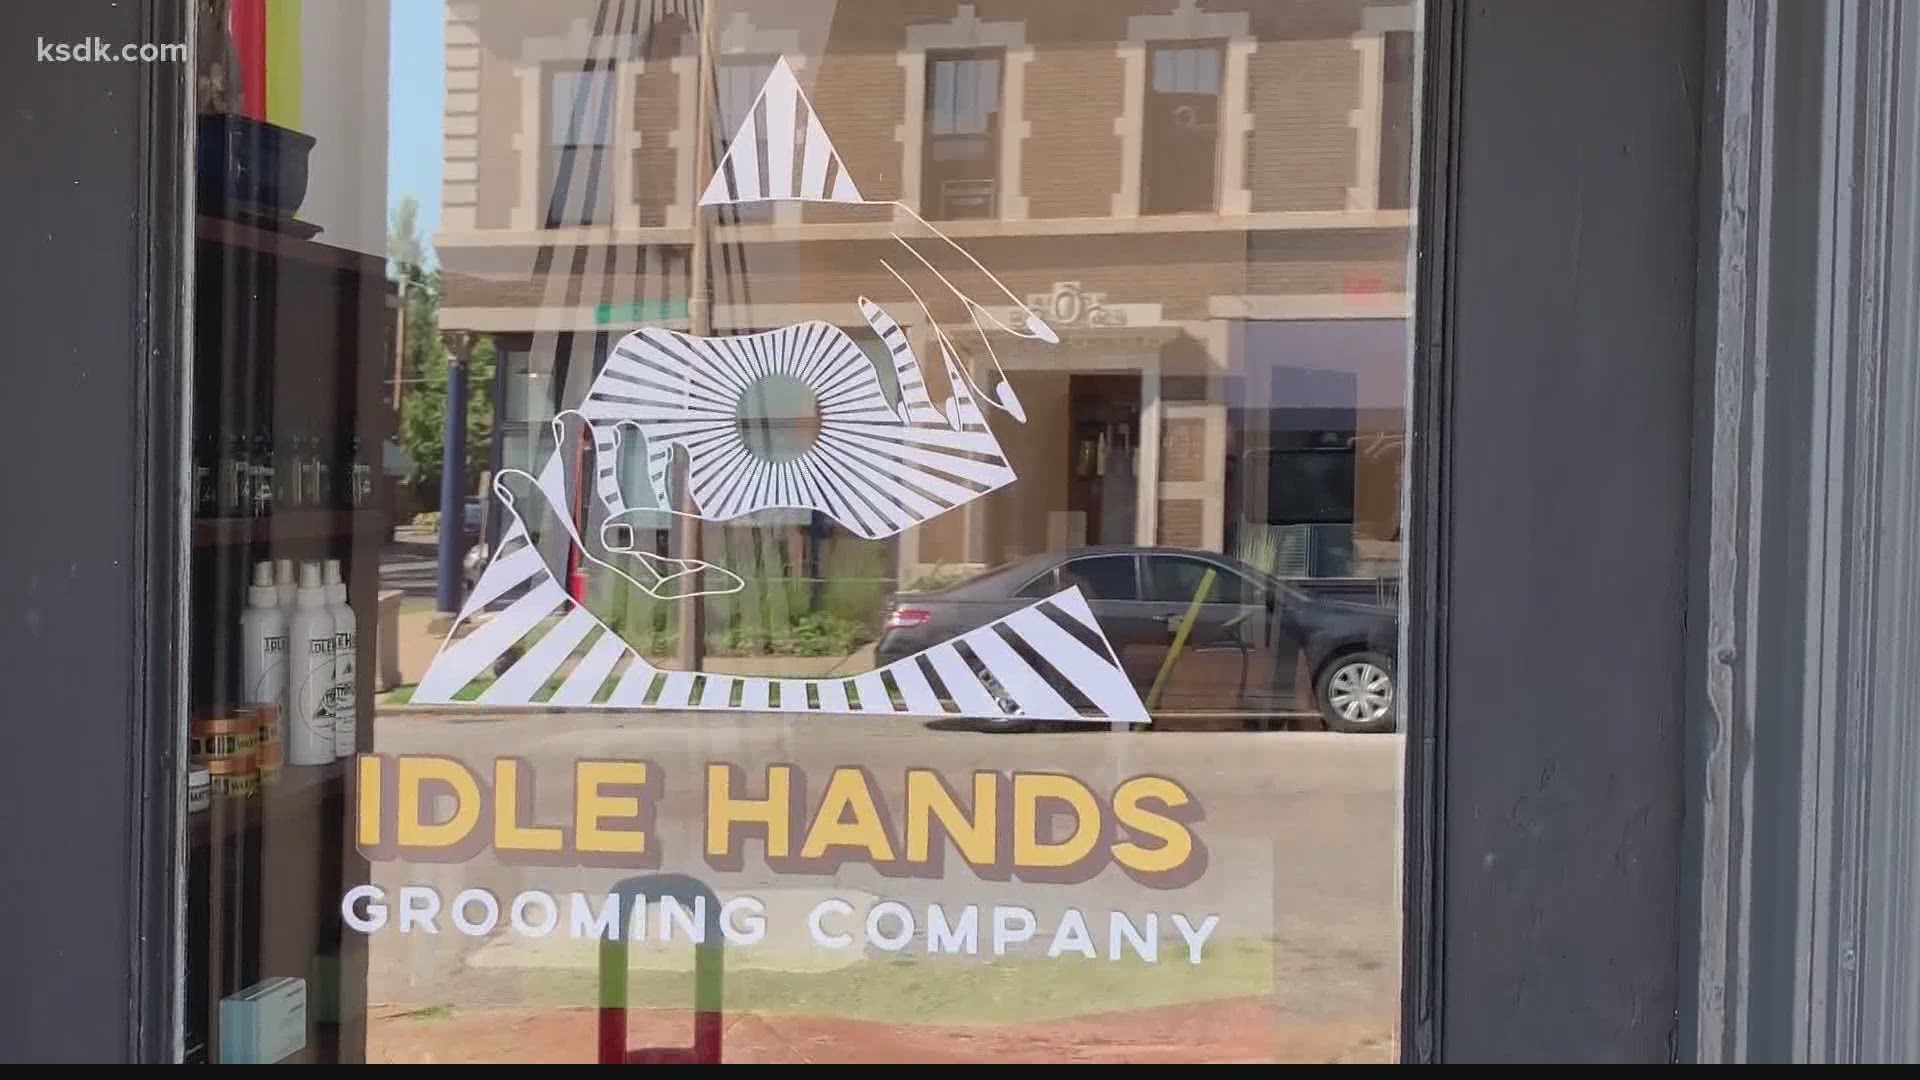 The pandemic has created hardship for a lot of local businesses, but Idle Hands Grooming Company was able to open in the midst of it all.